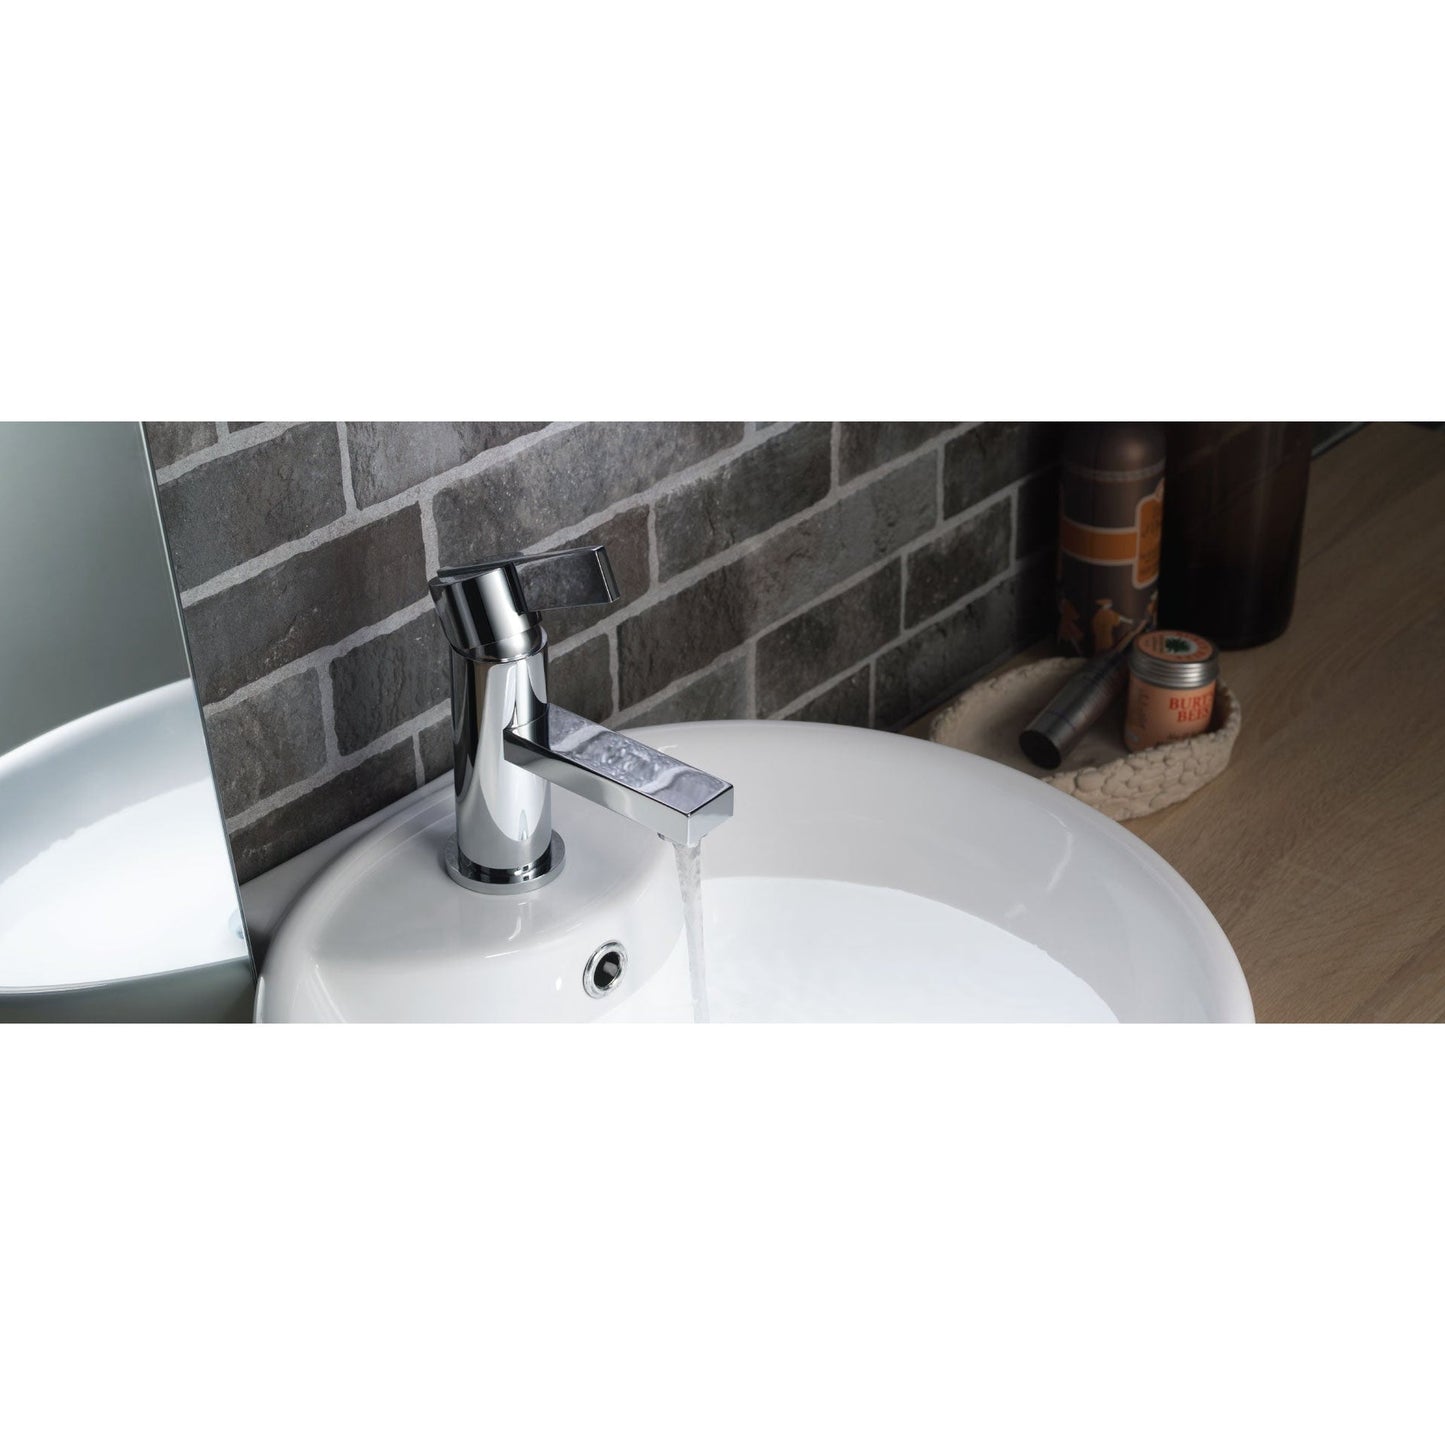 Isenberg Serie 145 6" Single-Hole Chrome Deck-Mounted Bathroom Sink Faucet With Pop-Up Drain